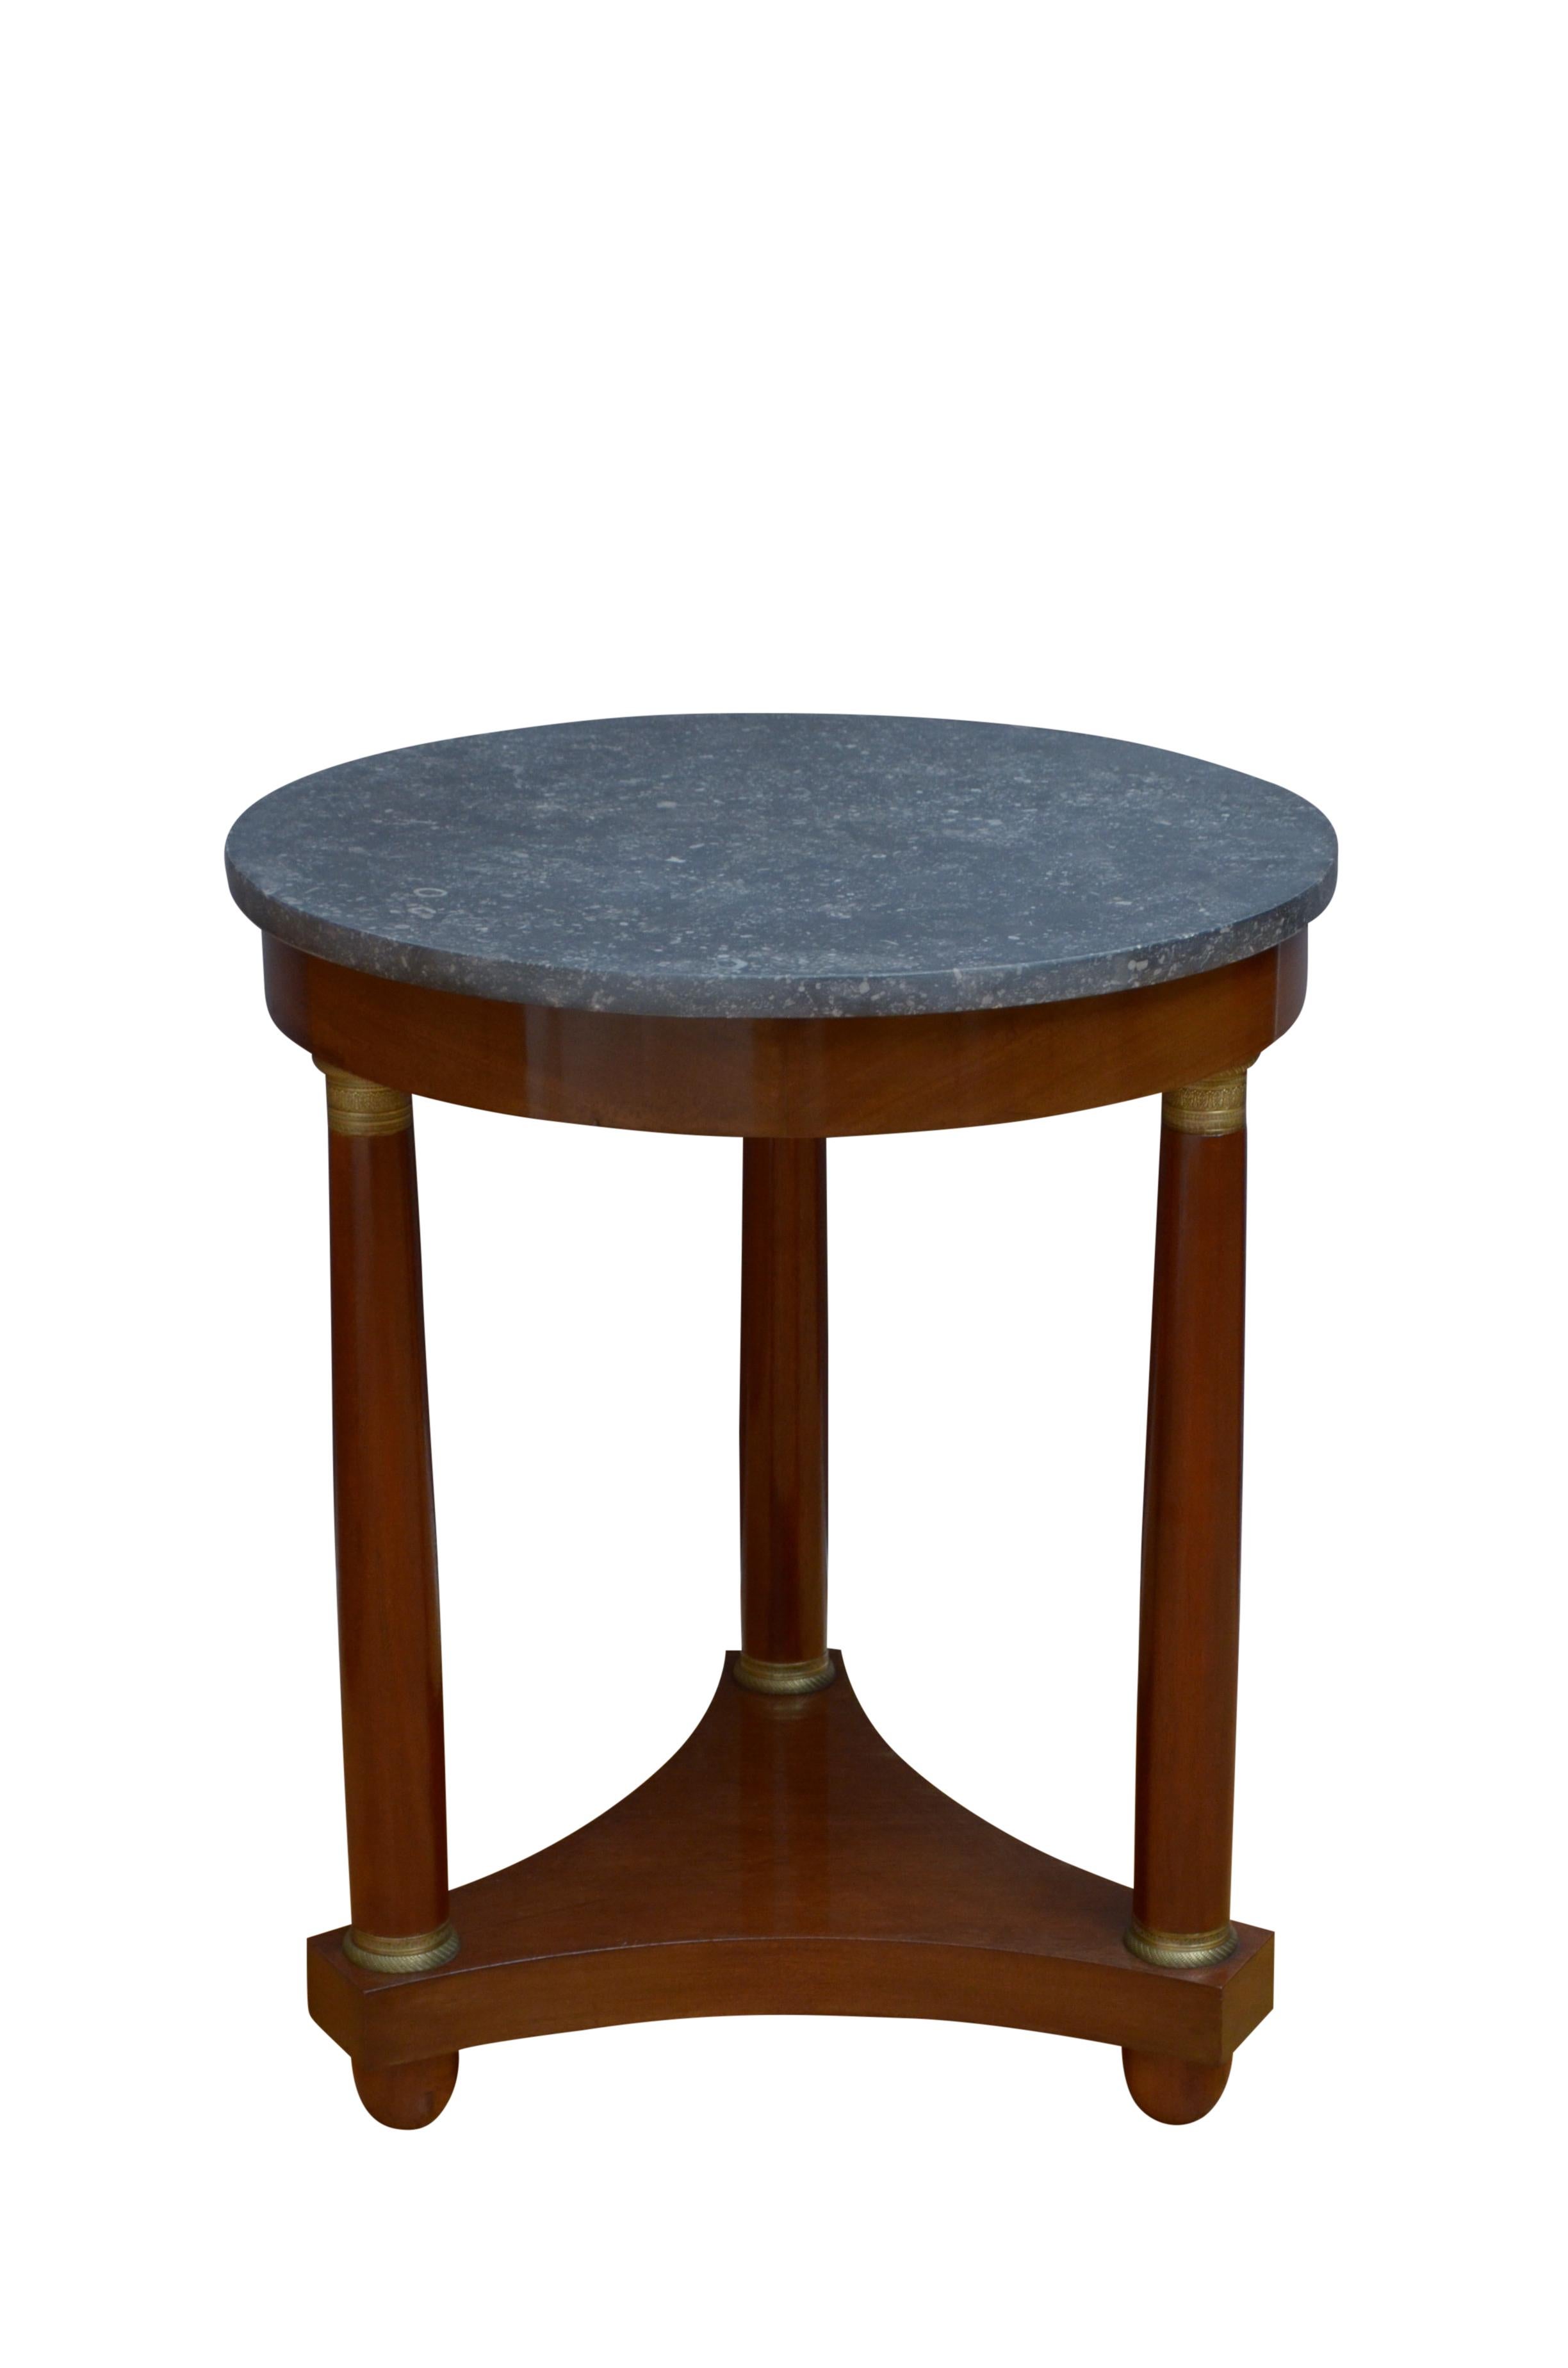 0226 Fine quality 19th century centre table of small proportions having original fossil marble top and shallow frieze, standing on three turned legs with fine brass capitols united by trefoil base terminating in original turned feet. This antique